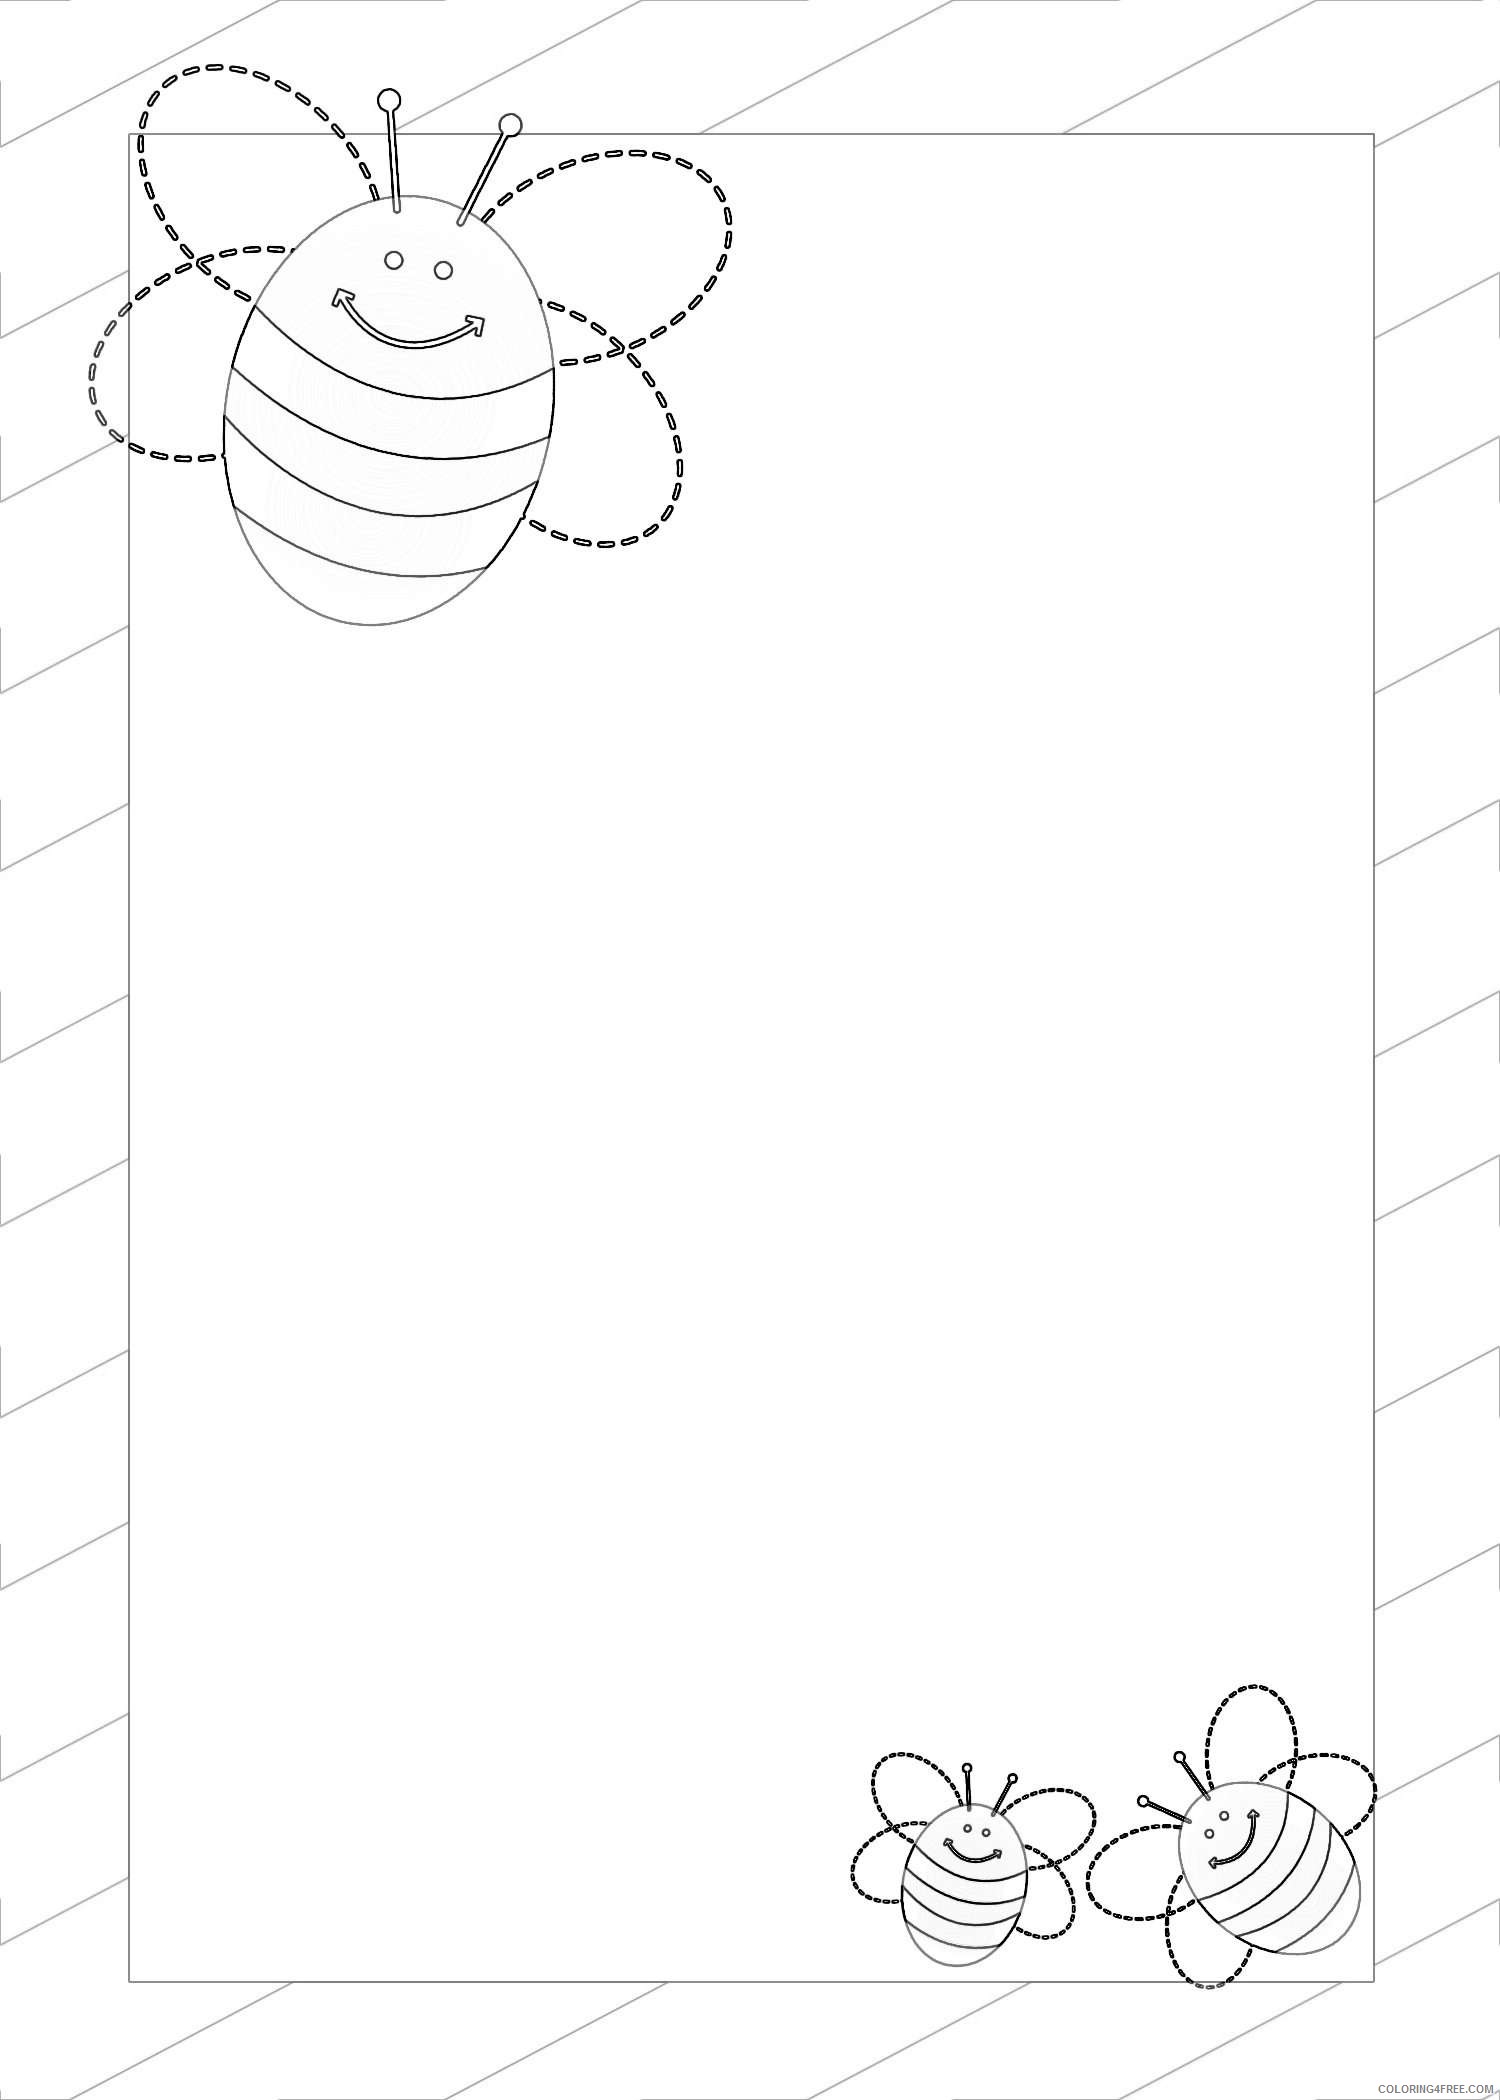 11 spelling bee borders that you can download to you xJONqr coloring